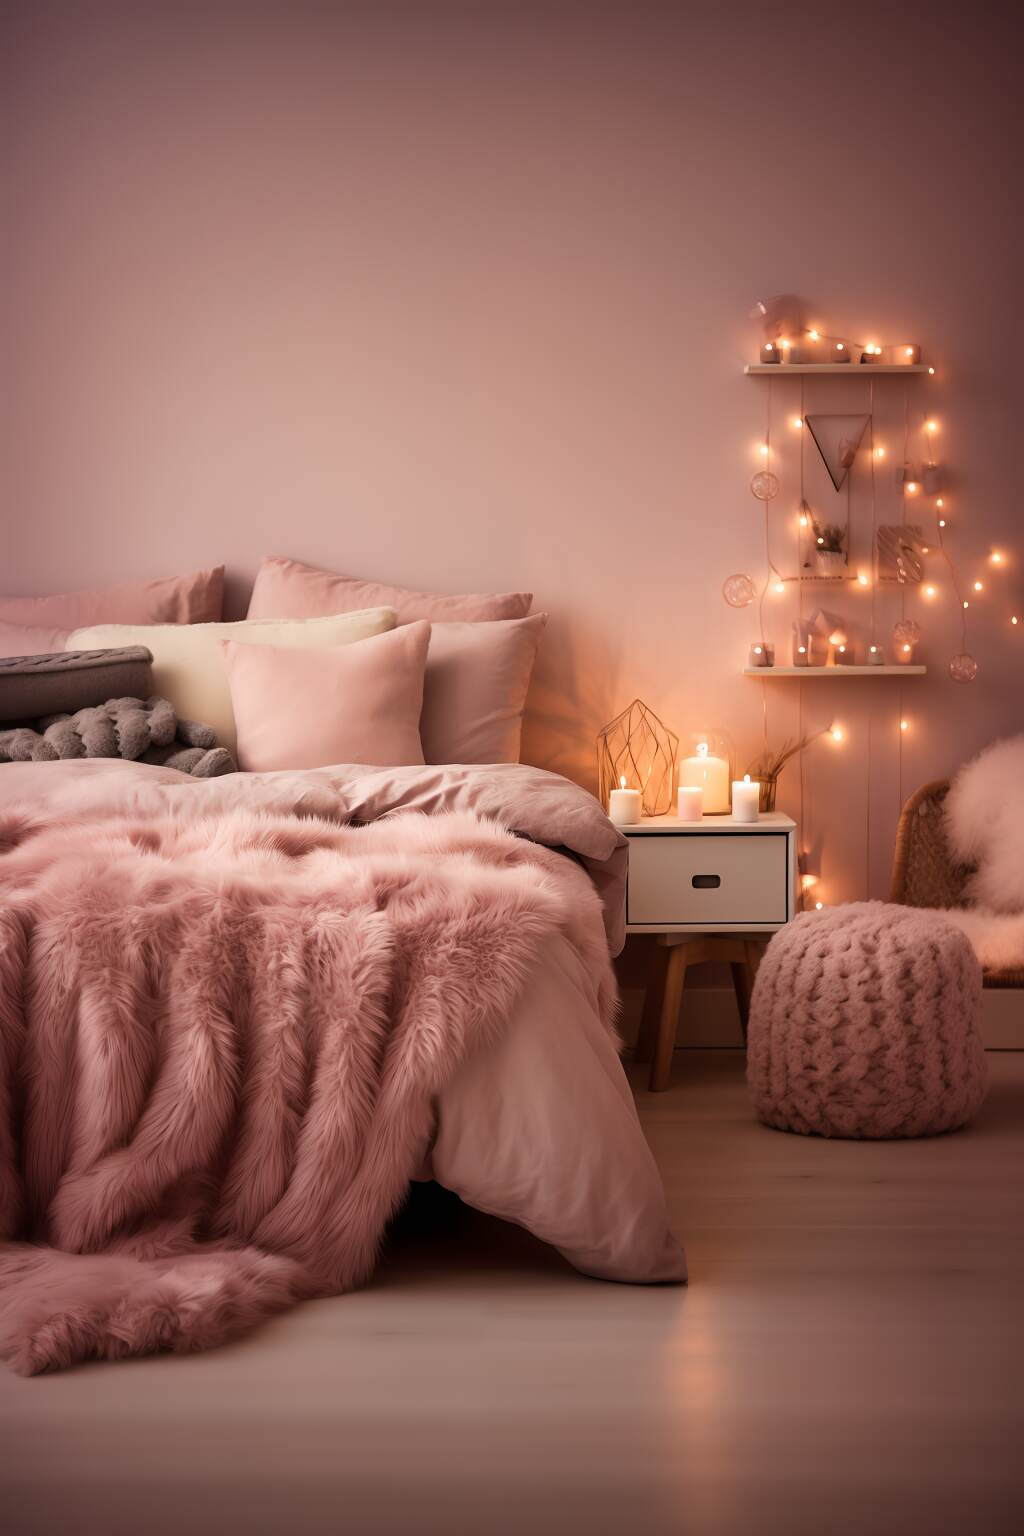 Cozy Dreamy Bedroom Painted In A Dusky Pink And Cream